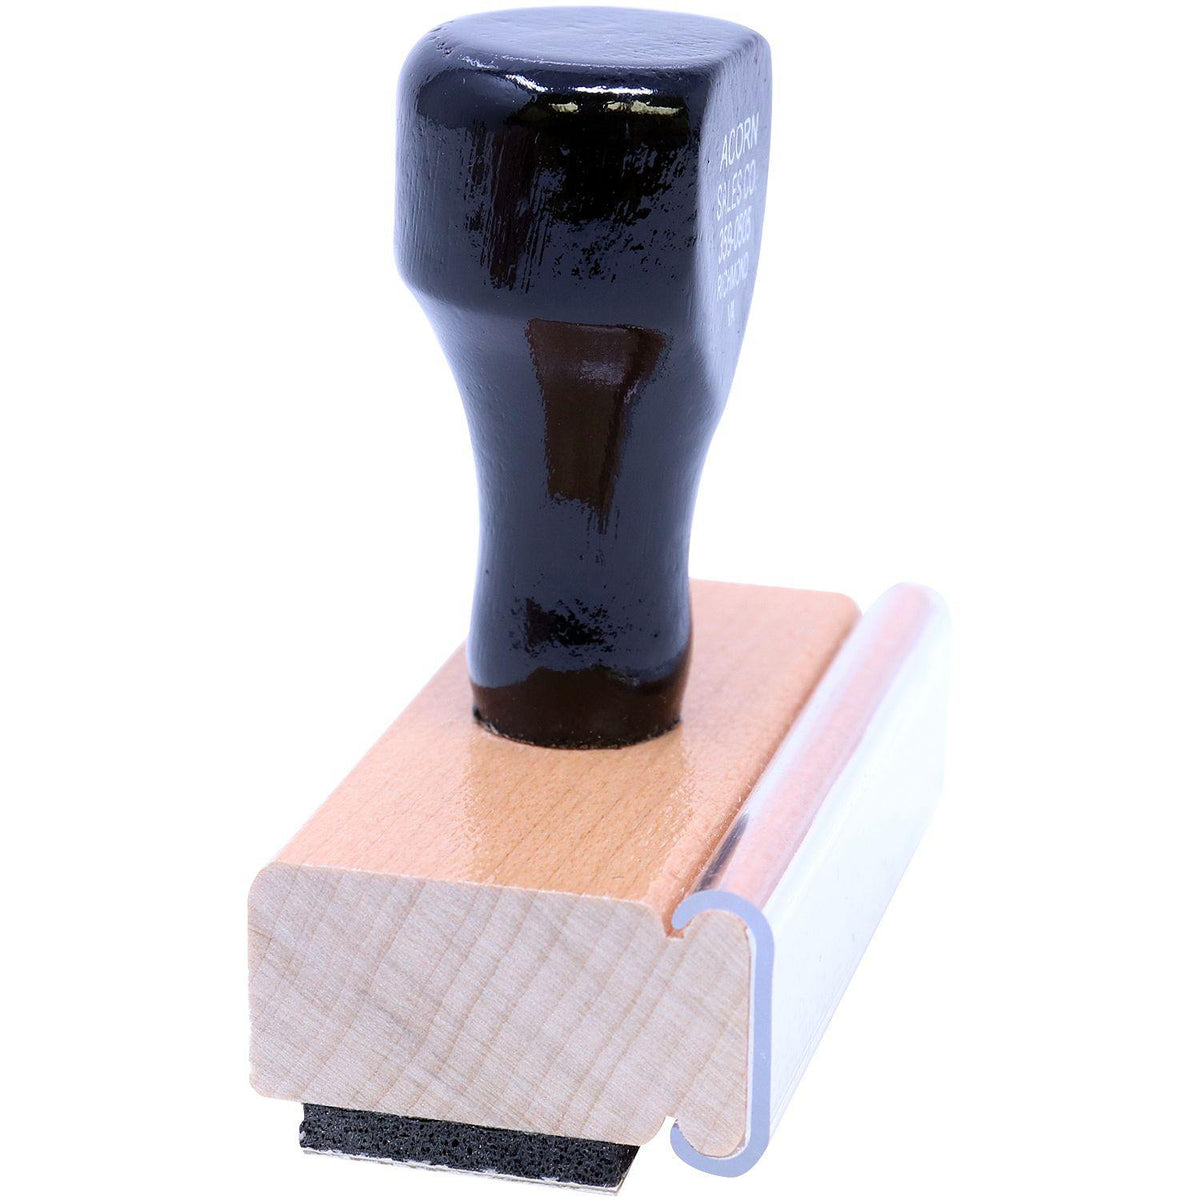 Media Mail Rubber Stamp - Engineer Seal Stamps - Brand_Acorn, Impression Size_Small, Stamp Type_Regular Stamp, Type of Use_Postal &amp; Mailing